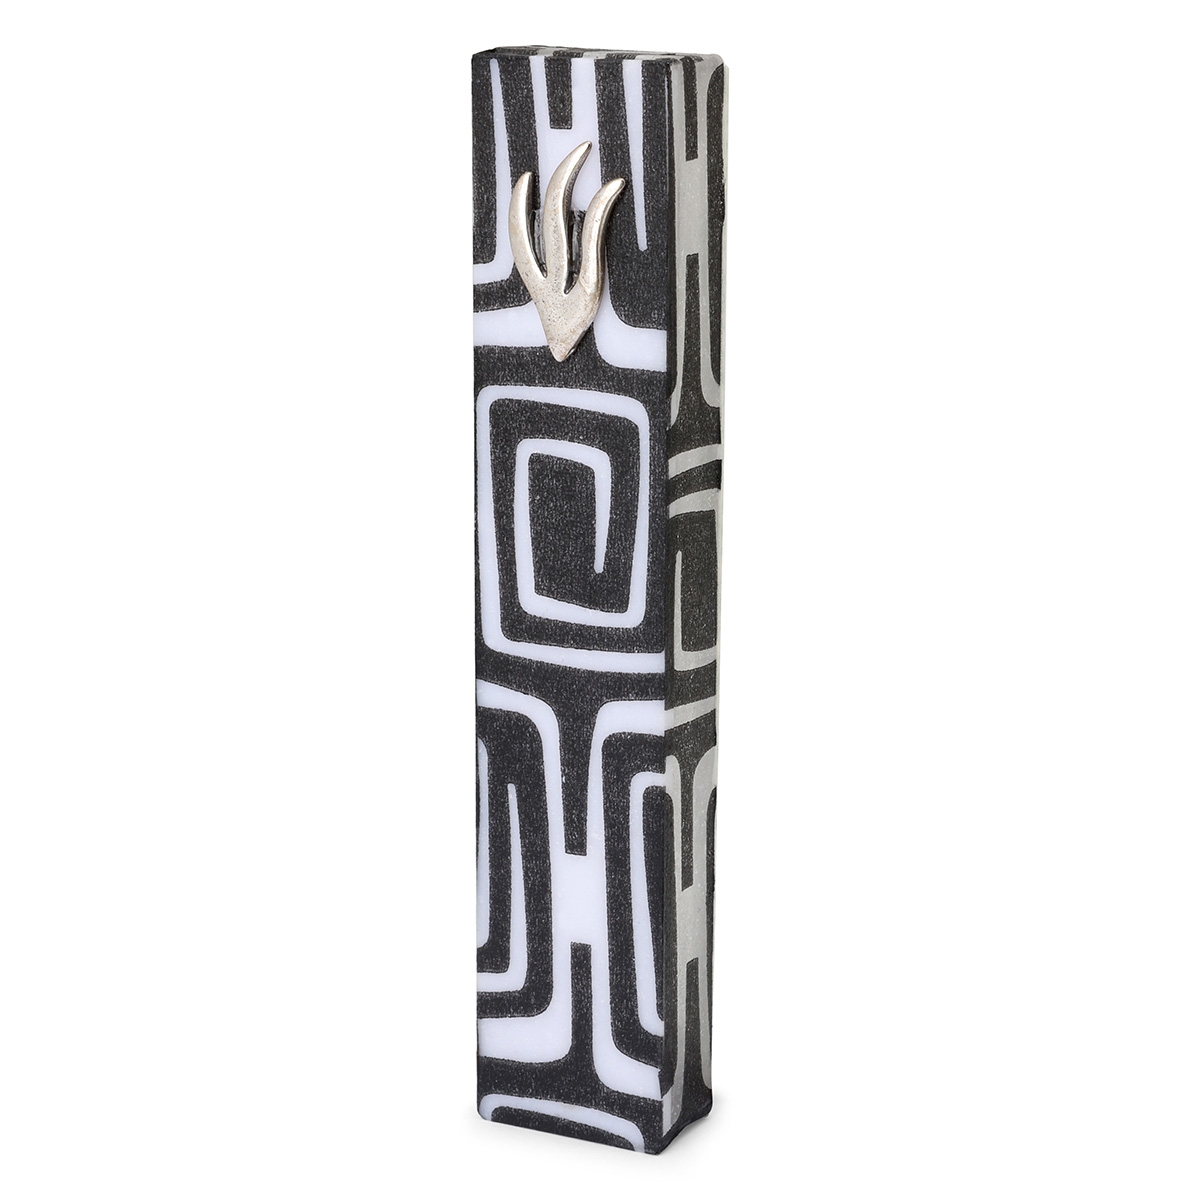 Lily Art Acrylic Mezuzah Case with Black and White Square Spiral Design - 1